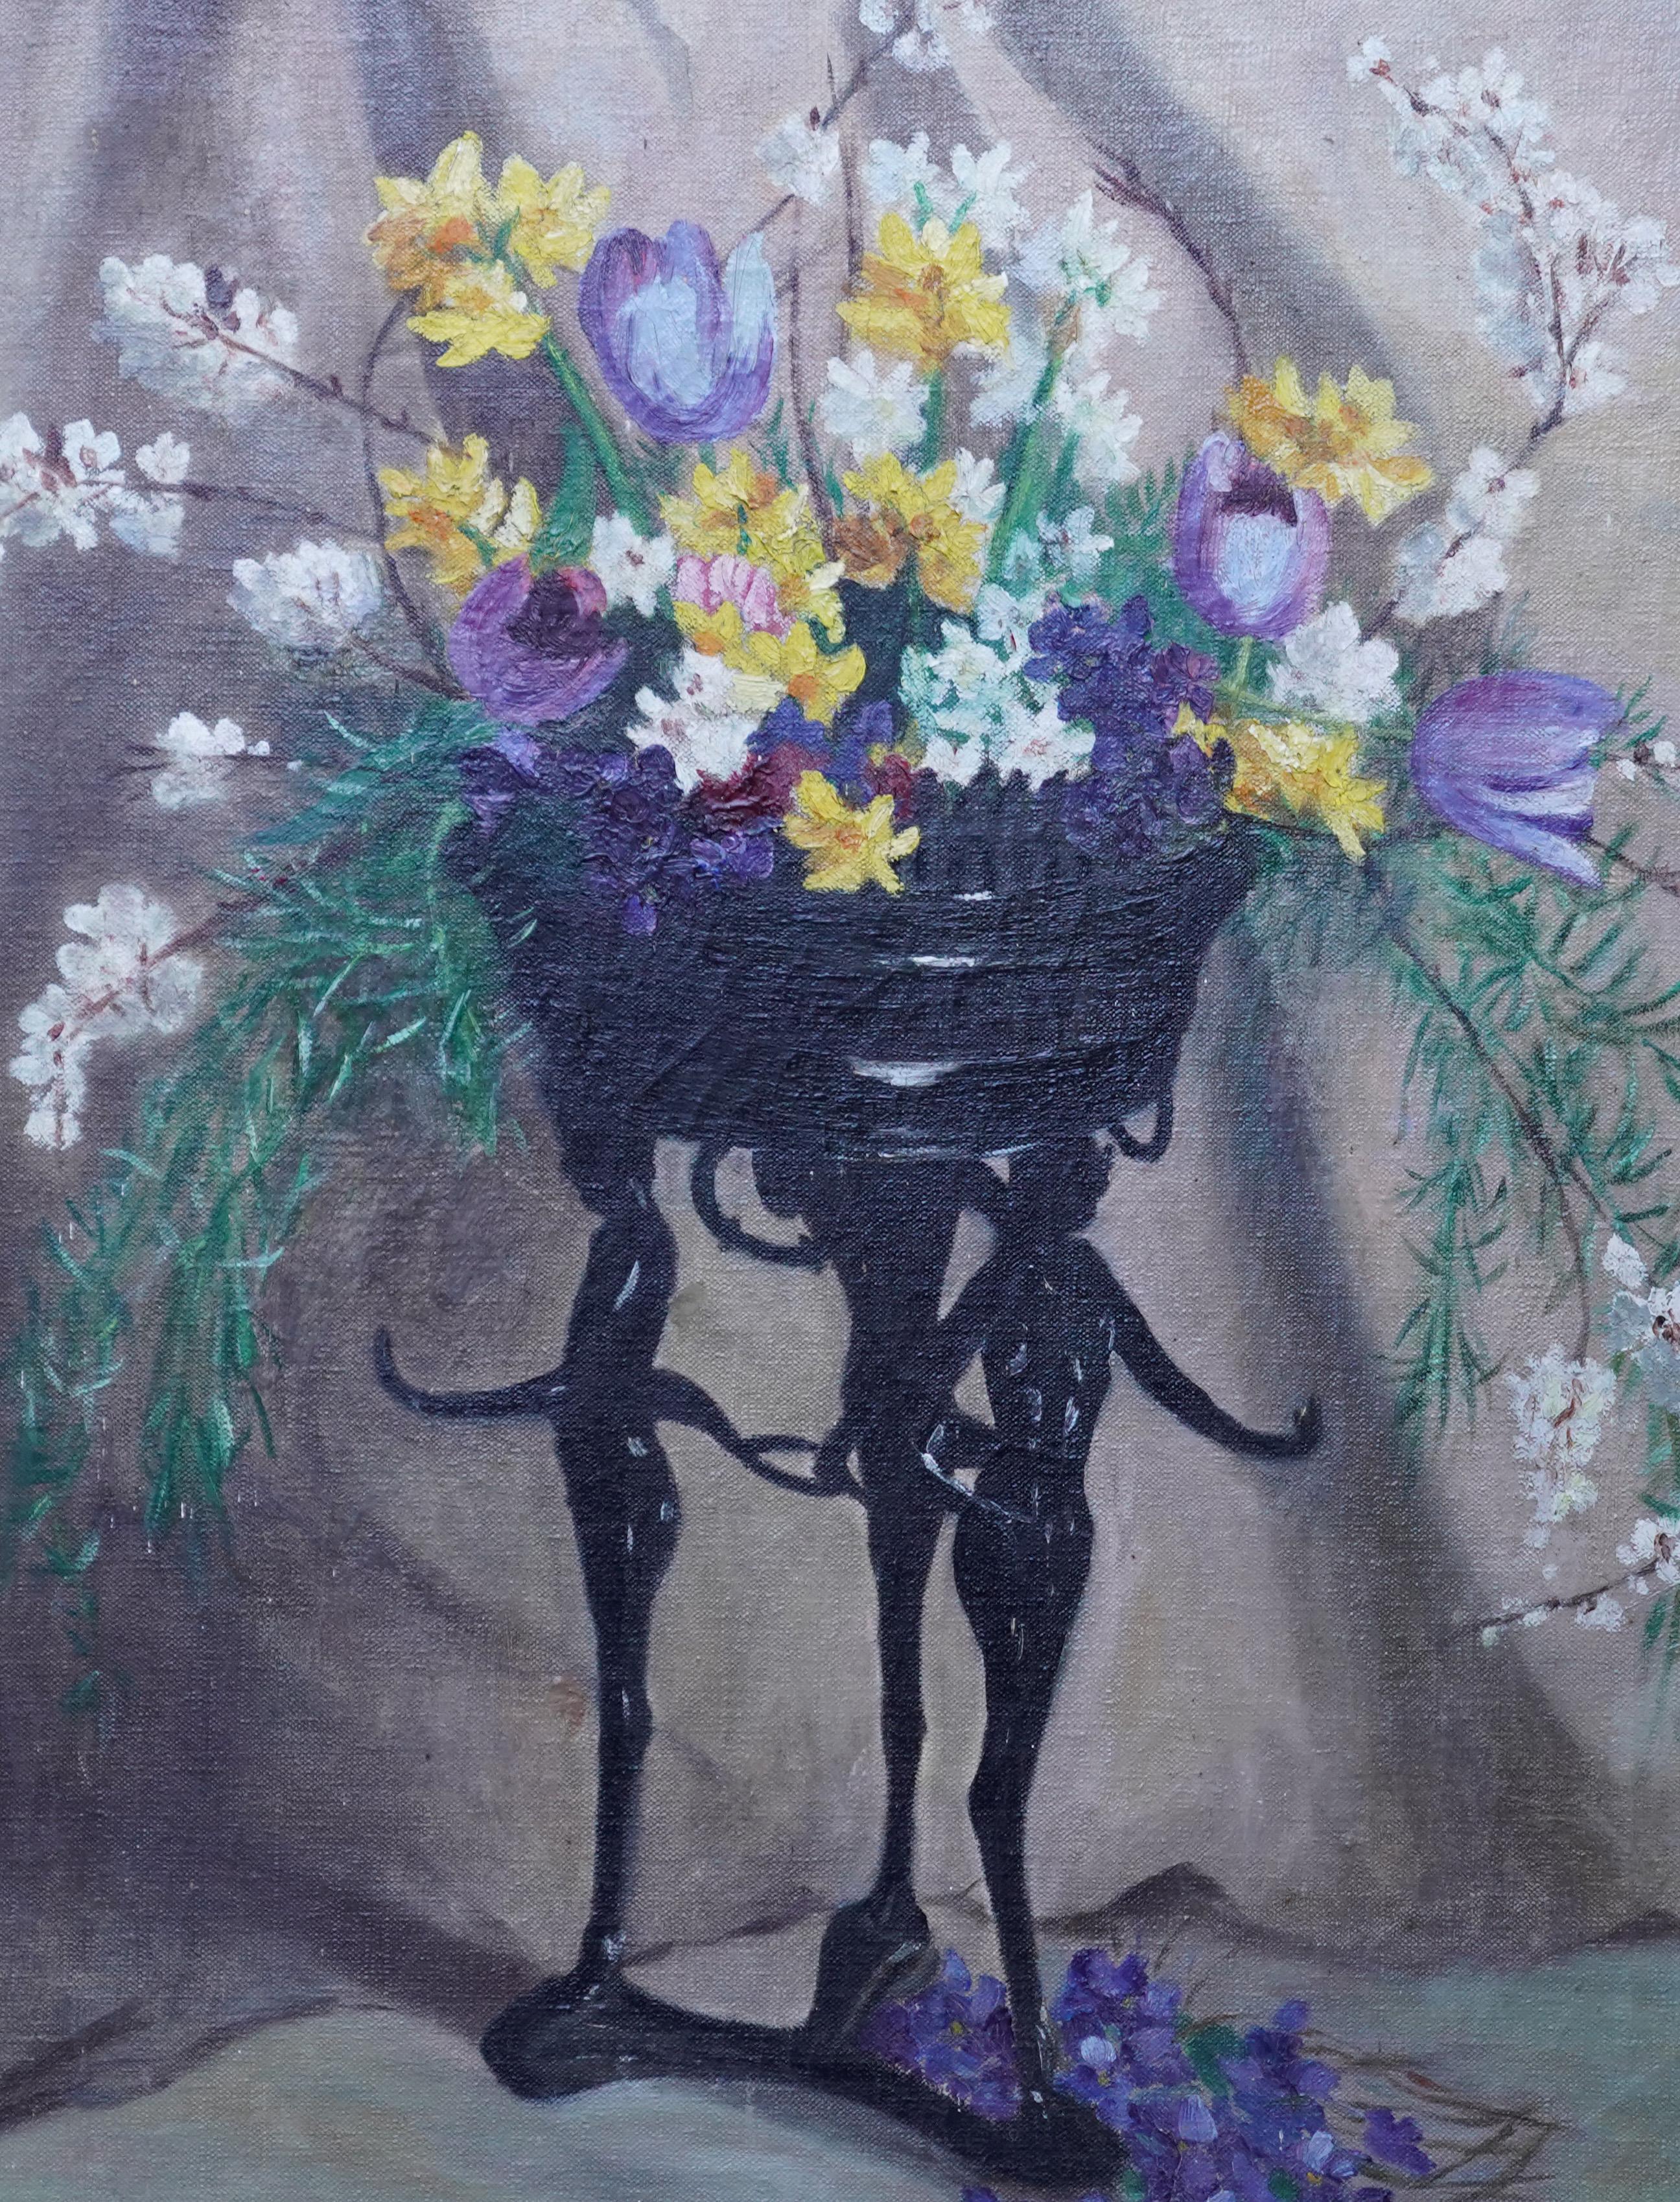 This beautiful British Art Deco floral oil painting is by noted Cornish artist Philip Rashleigh, who used the name Frank for exhibition purposes. The Rashleighs were an old and distinguished Cornish Family and Rashleigh studied under Stanhope Forbes